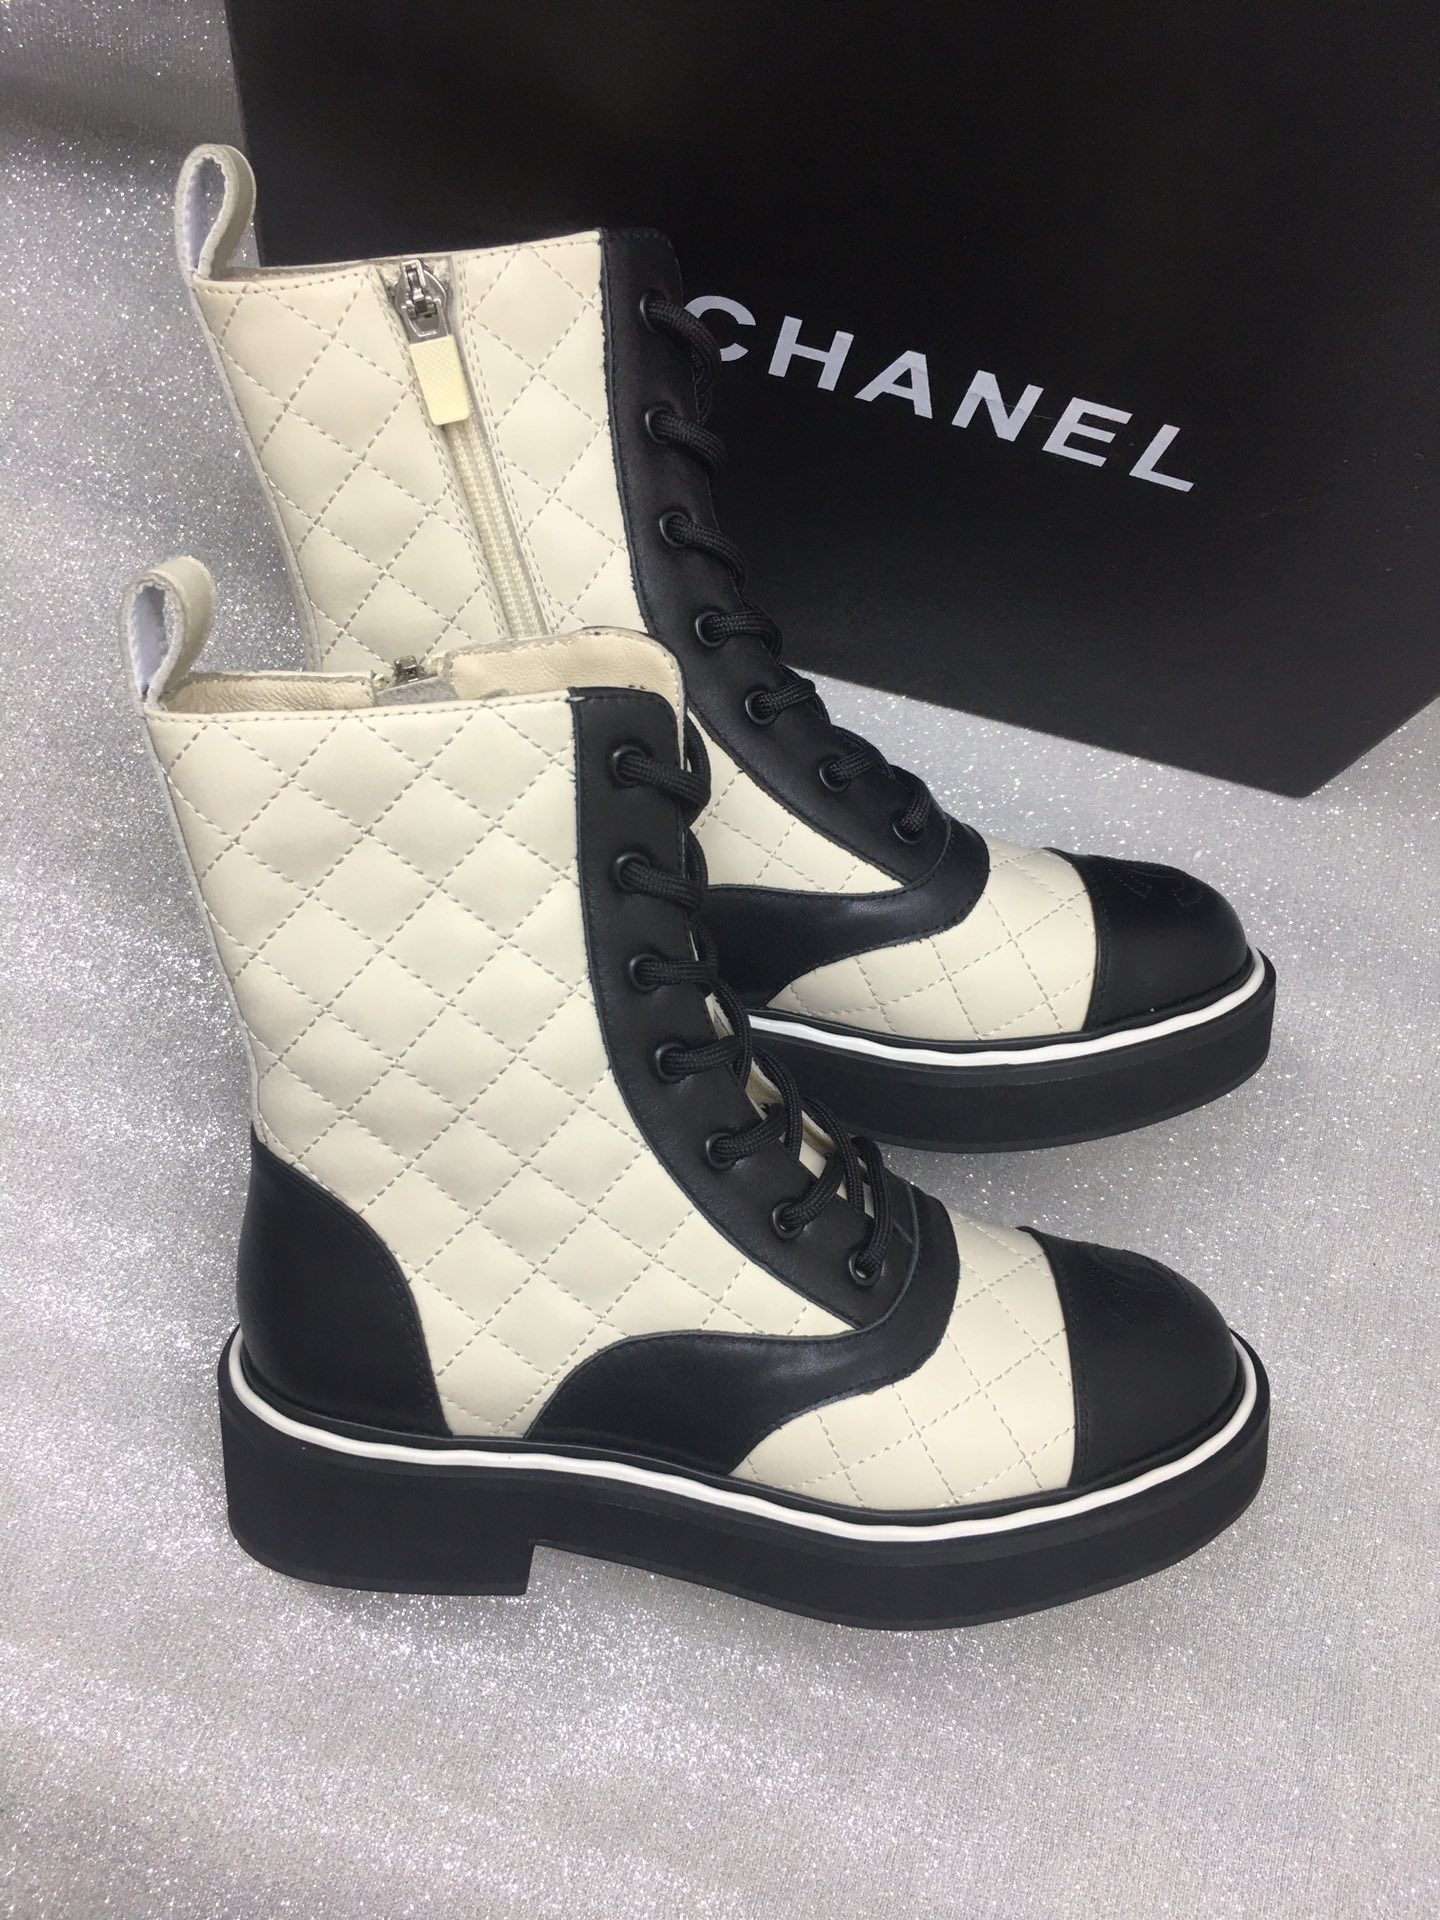 Chanel boots for autumn/winter